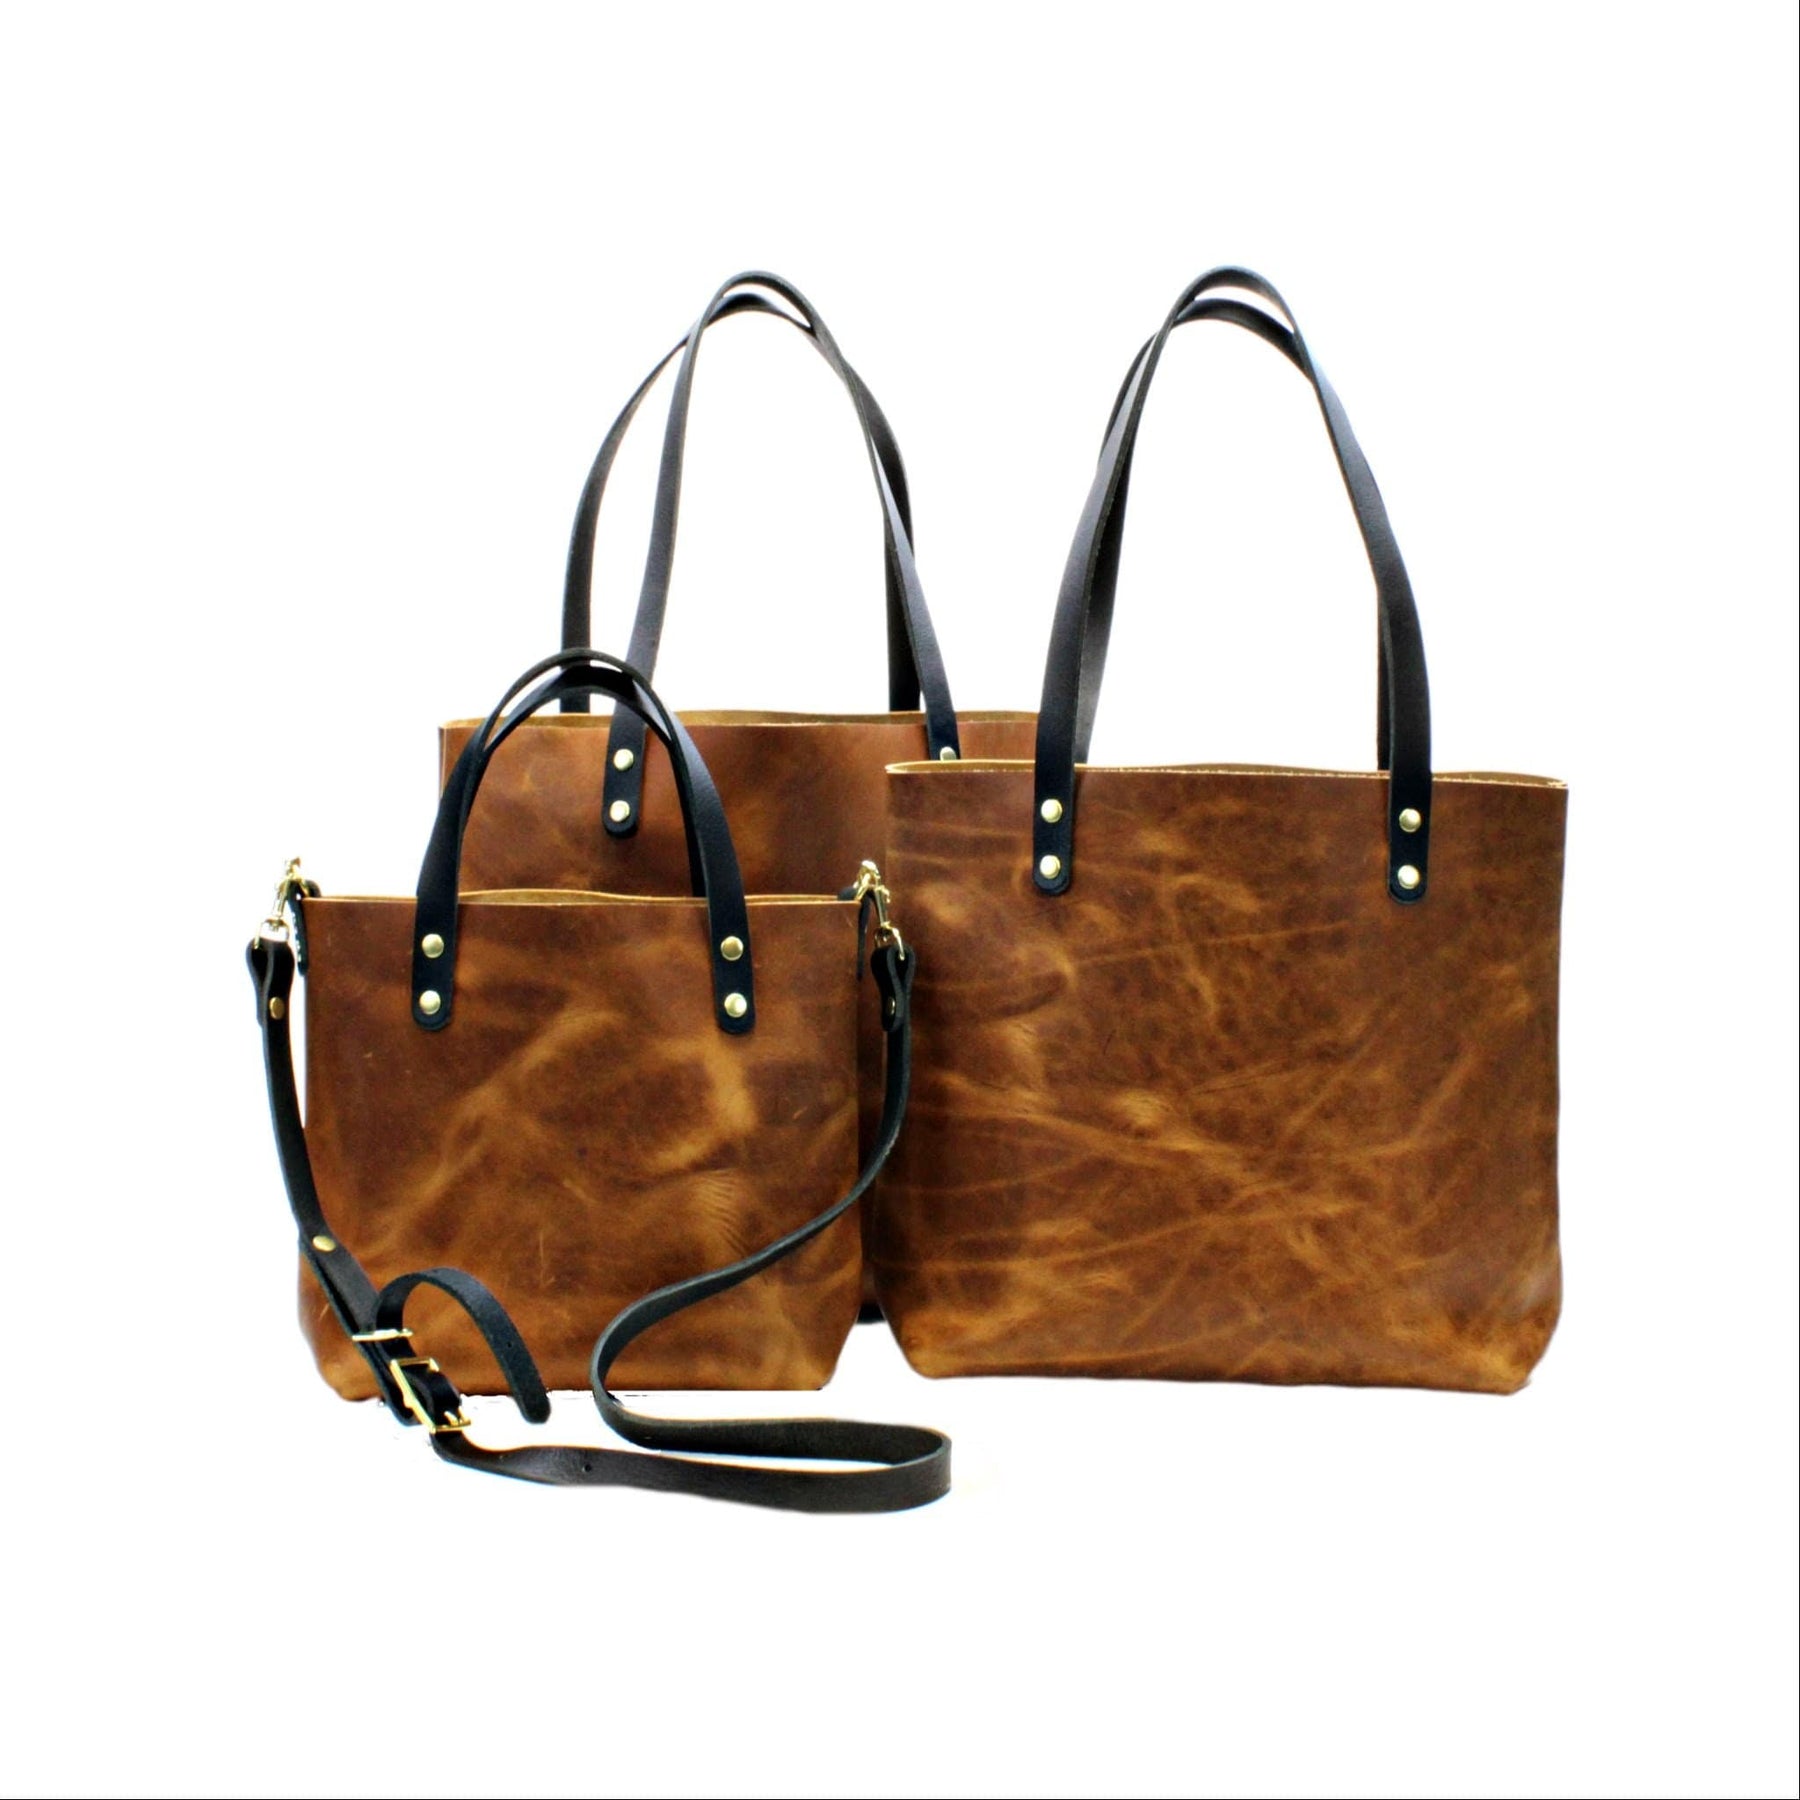 Kerry Noël Women's Leather Tote Bag